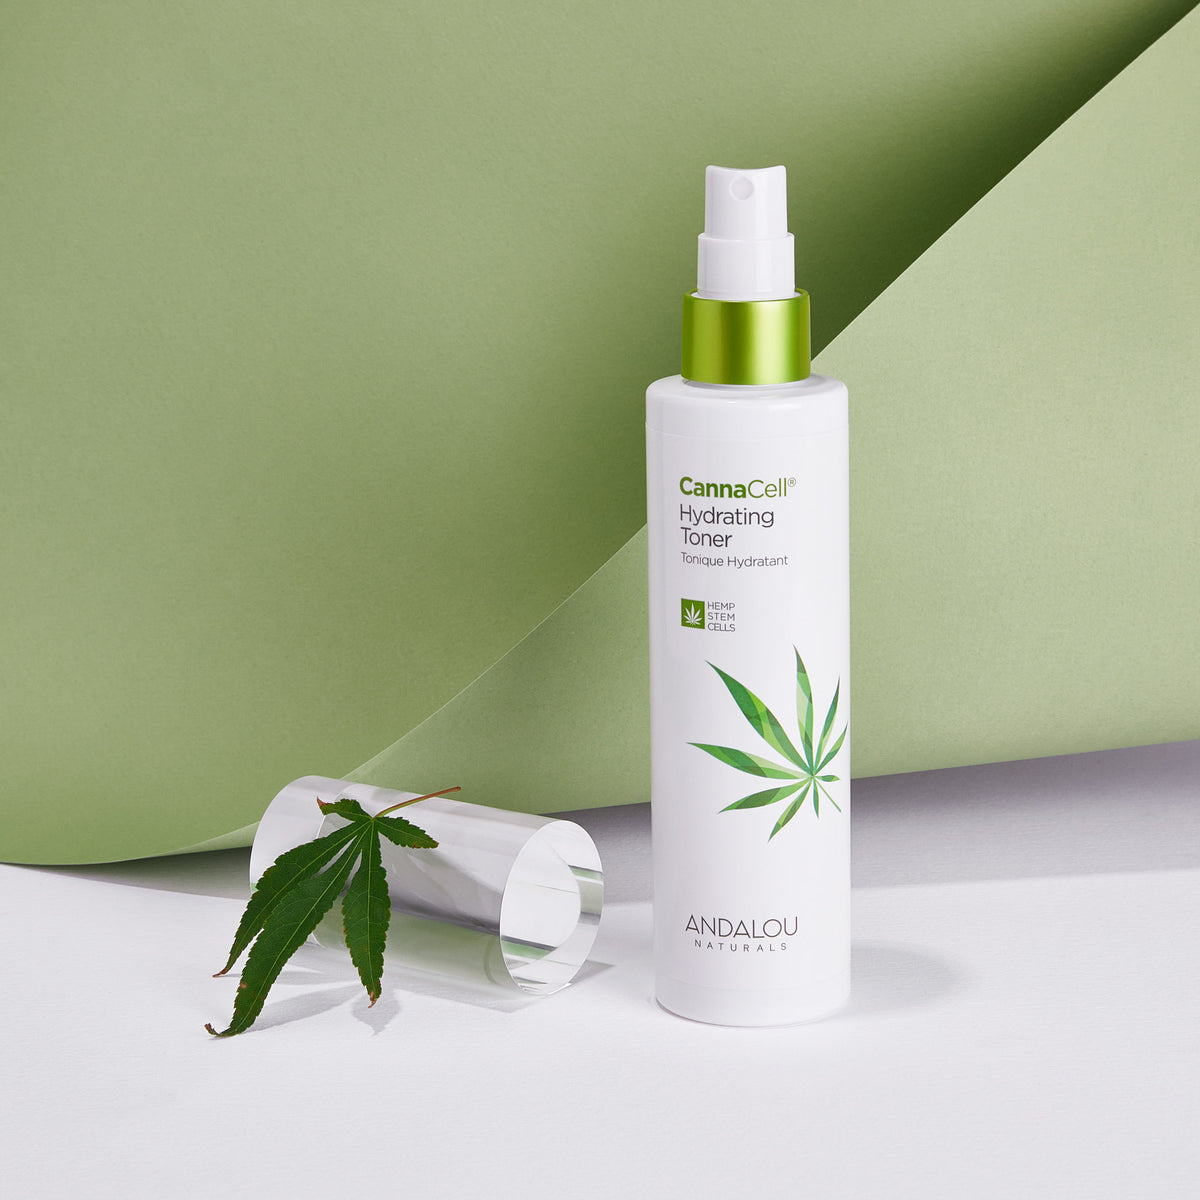 Spray bottle of CannaCell Hydrating Toner from Andalou Naturals with glass tube.